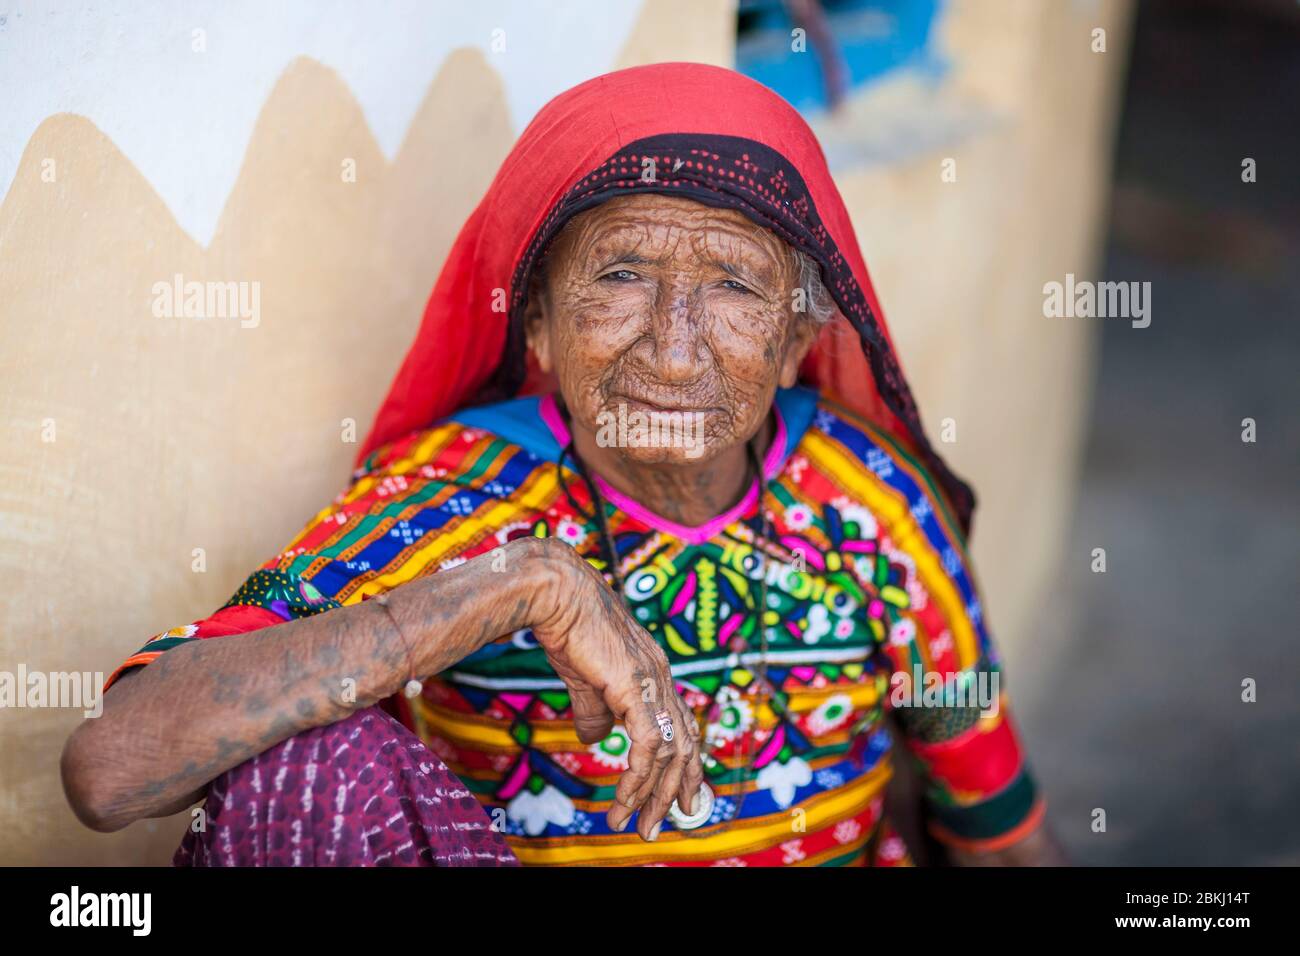 India, Gujarat State, Kutch region, Ludiya village, near Bhuj, portrait of a Meghwal tribe old woman wearing traditional embroidered clothes in front of a decorated hut Stock Photo